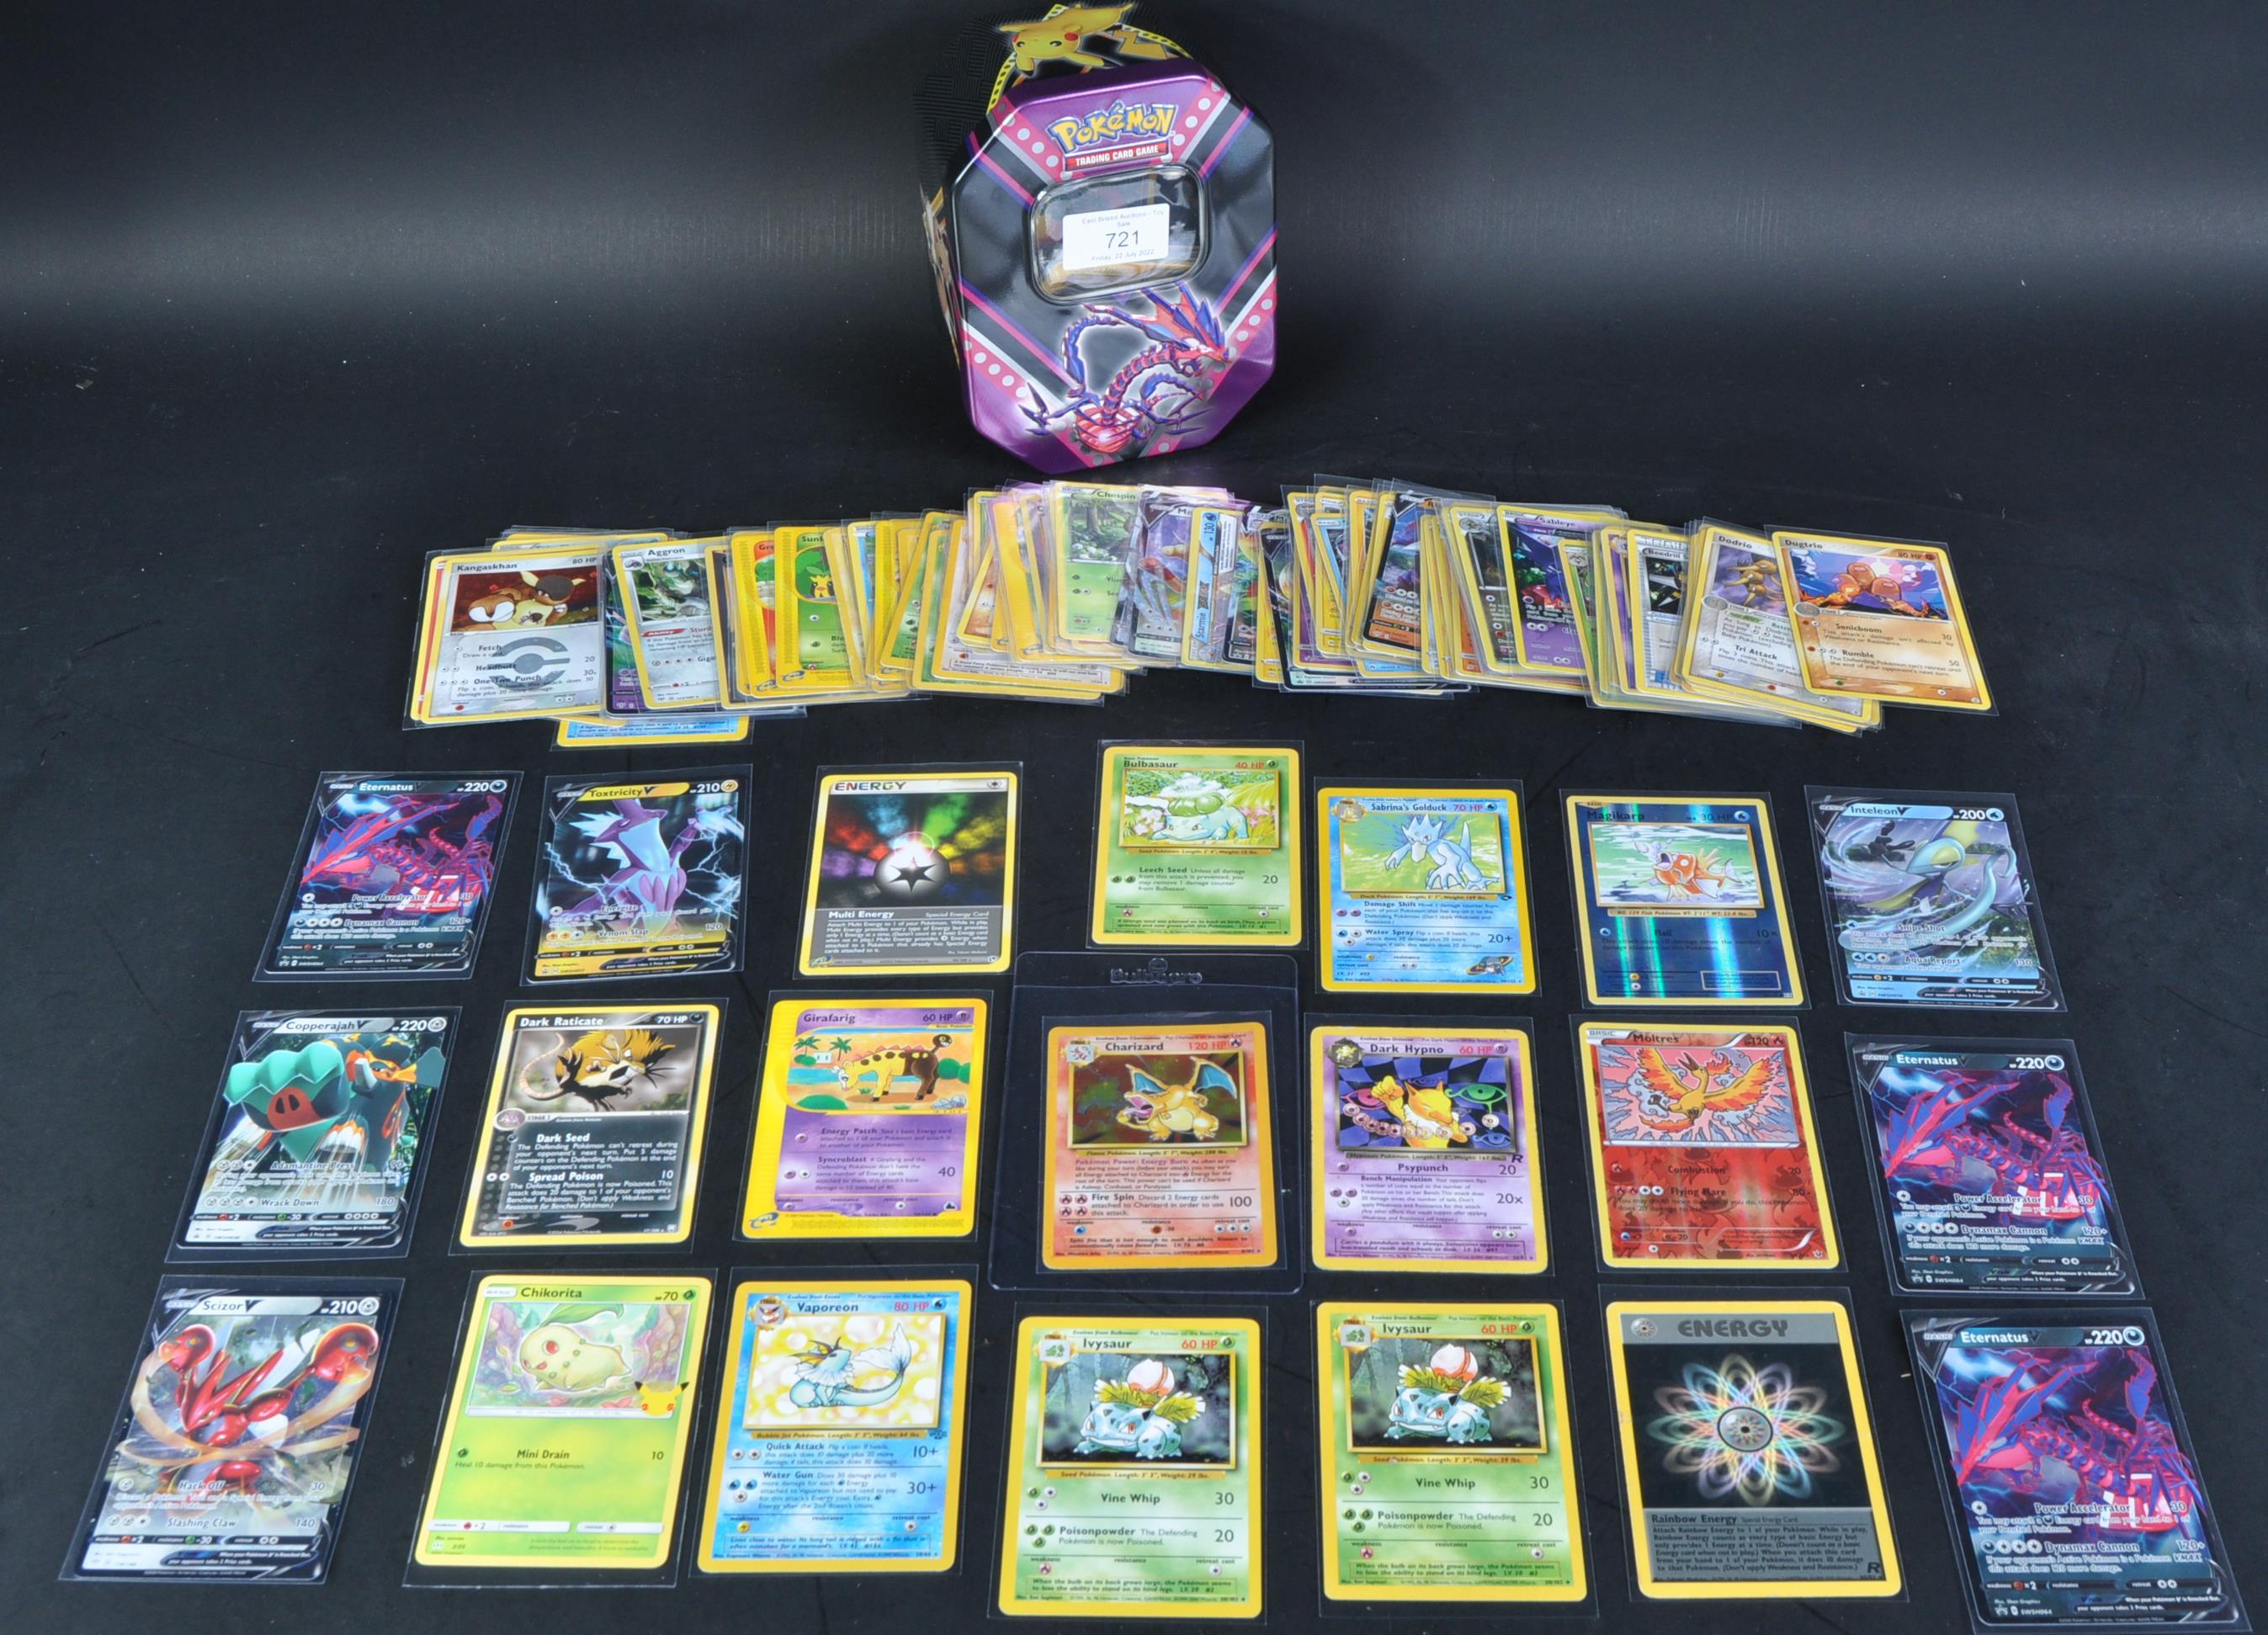 POKEMON TRADING CARD GAME - COLLECTION OF ASSORTED VINTAGE & MODERN POKEMON CARDS